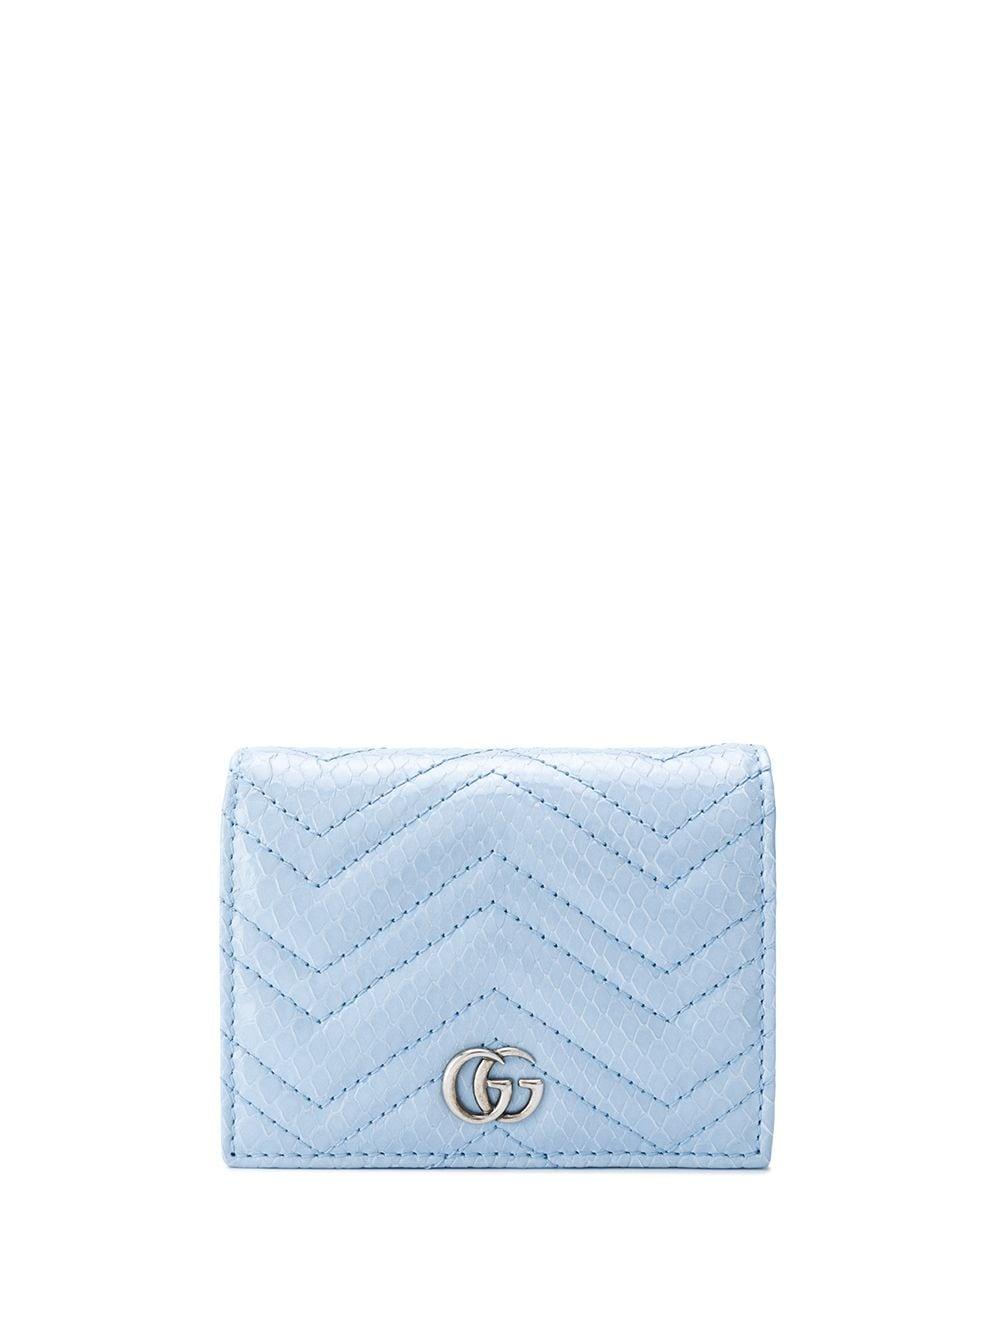 Gucci GG Marmont Card Case in Blue | Lyst